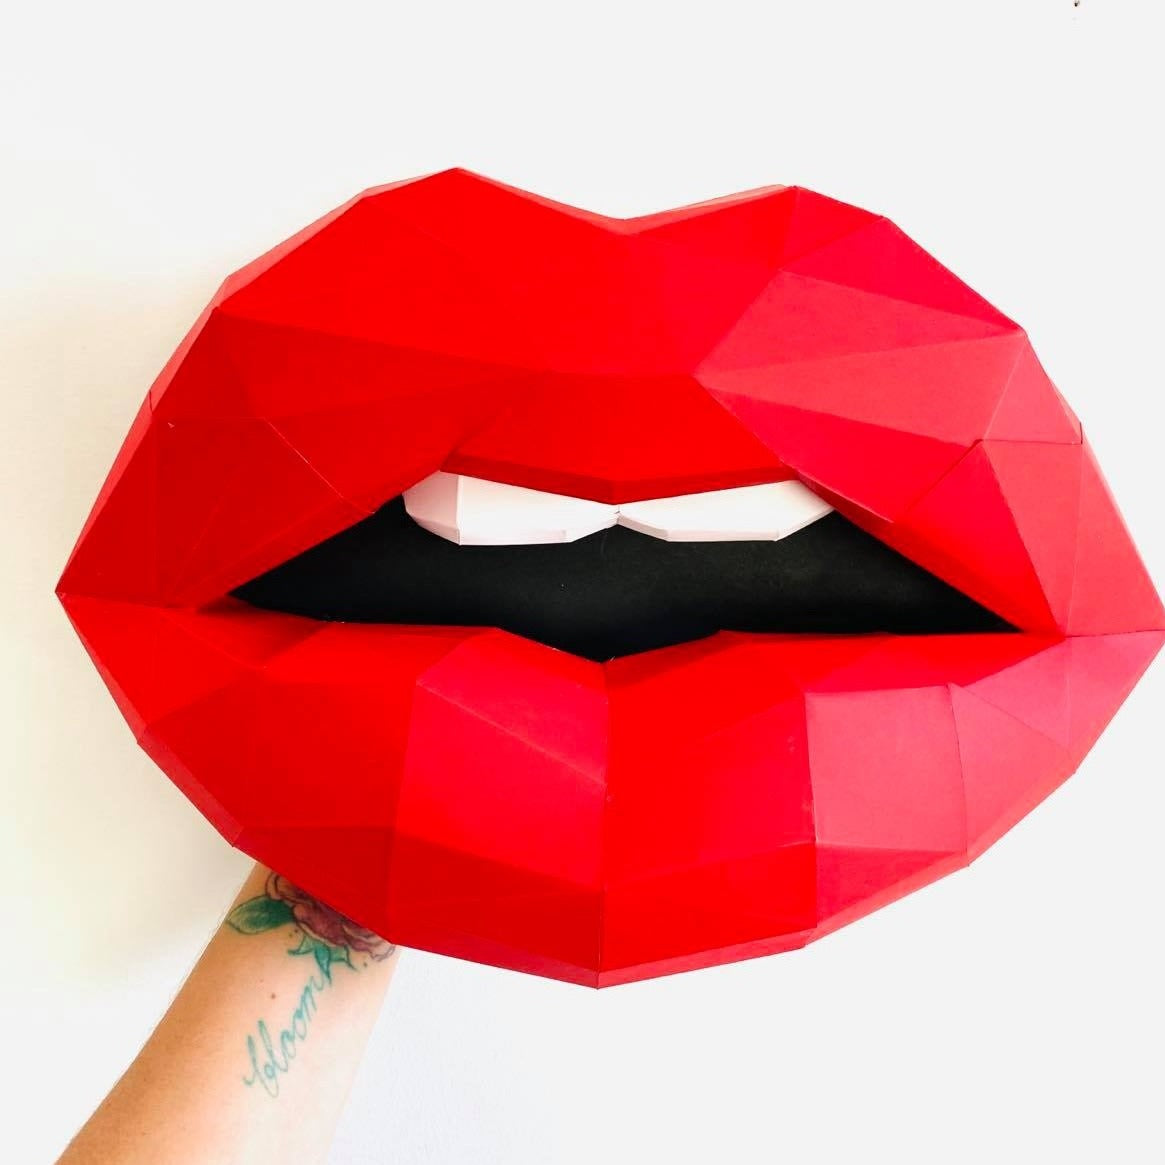 Paper Lips Red Matte Wall Art for Home Office or Salon | Simple and modern Lippies | Puckered Kissing Gift for Minimal Fashion Lover - Pucker Up Lips and Accessories